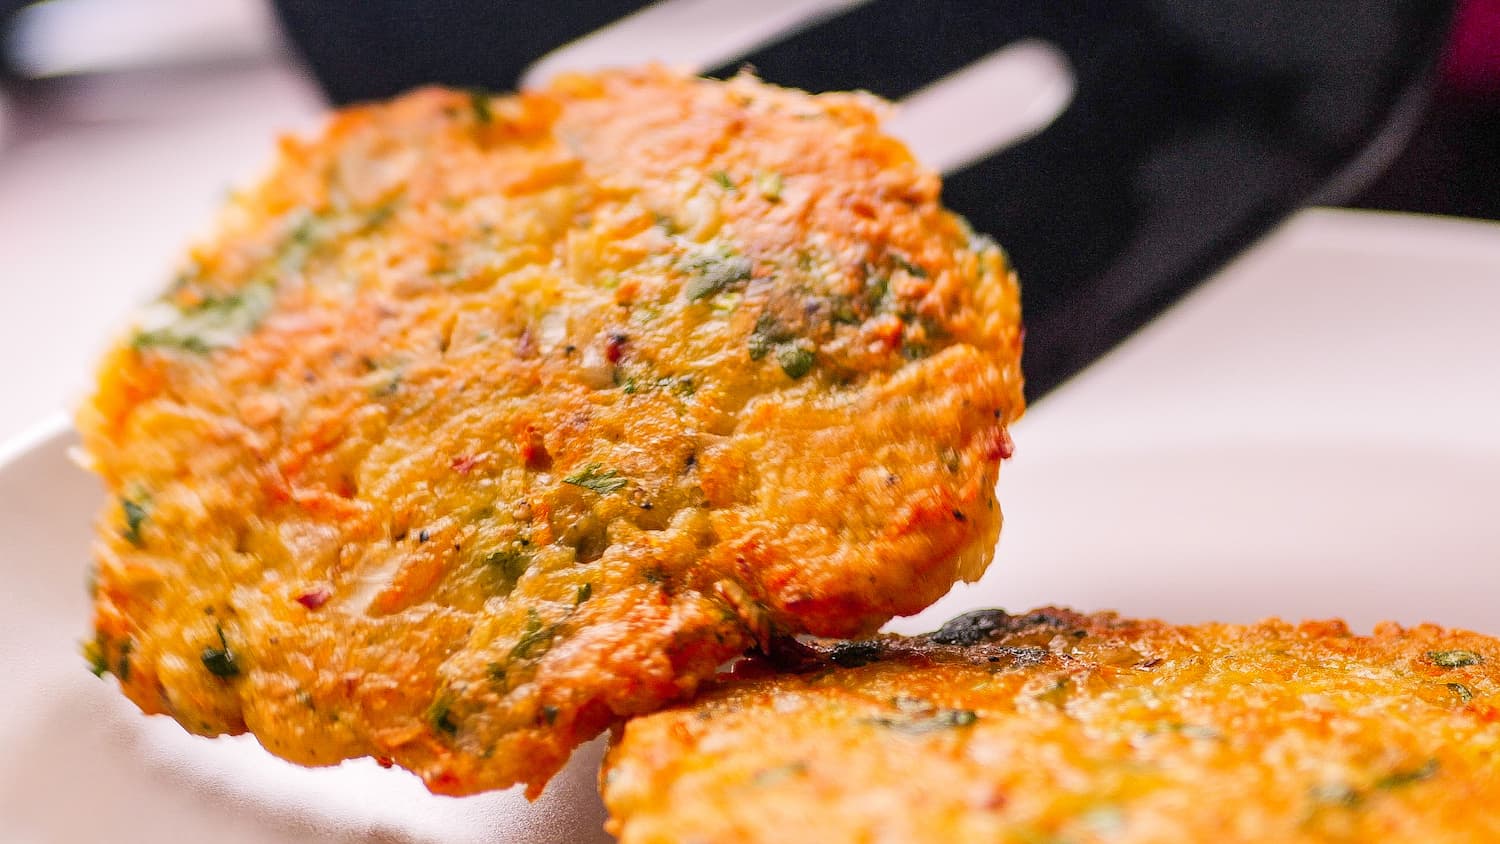 Potato and Carrot Fritters Recipe | The best Carrot and Potato Fritters